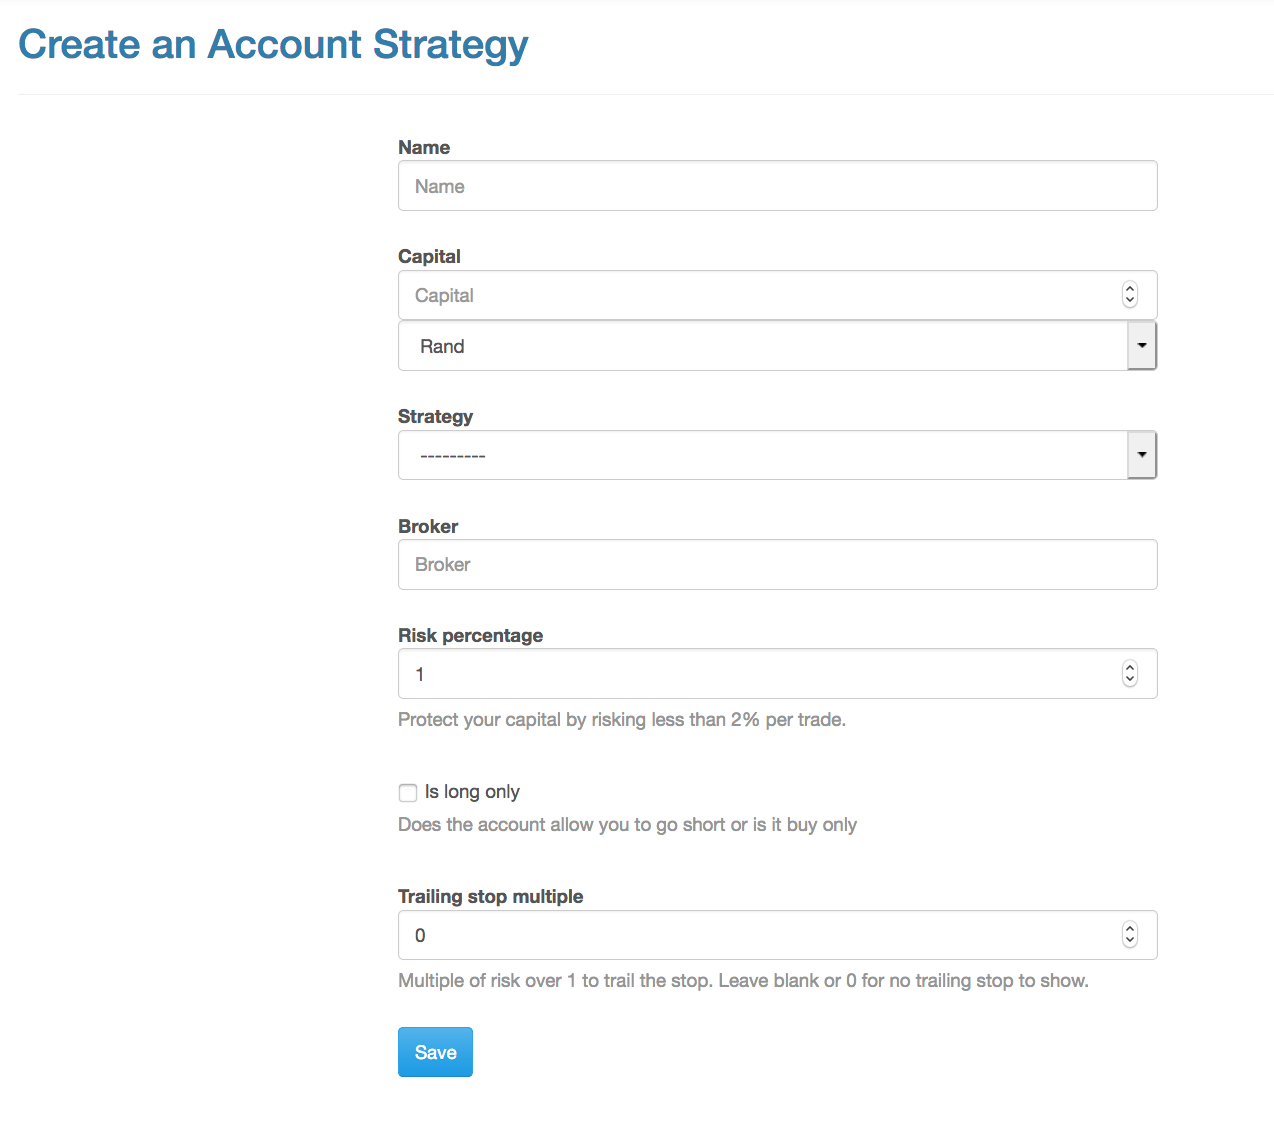 Create an Account Strategy on Trademate